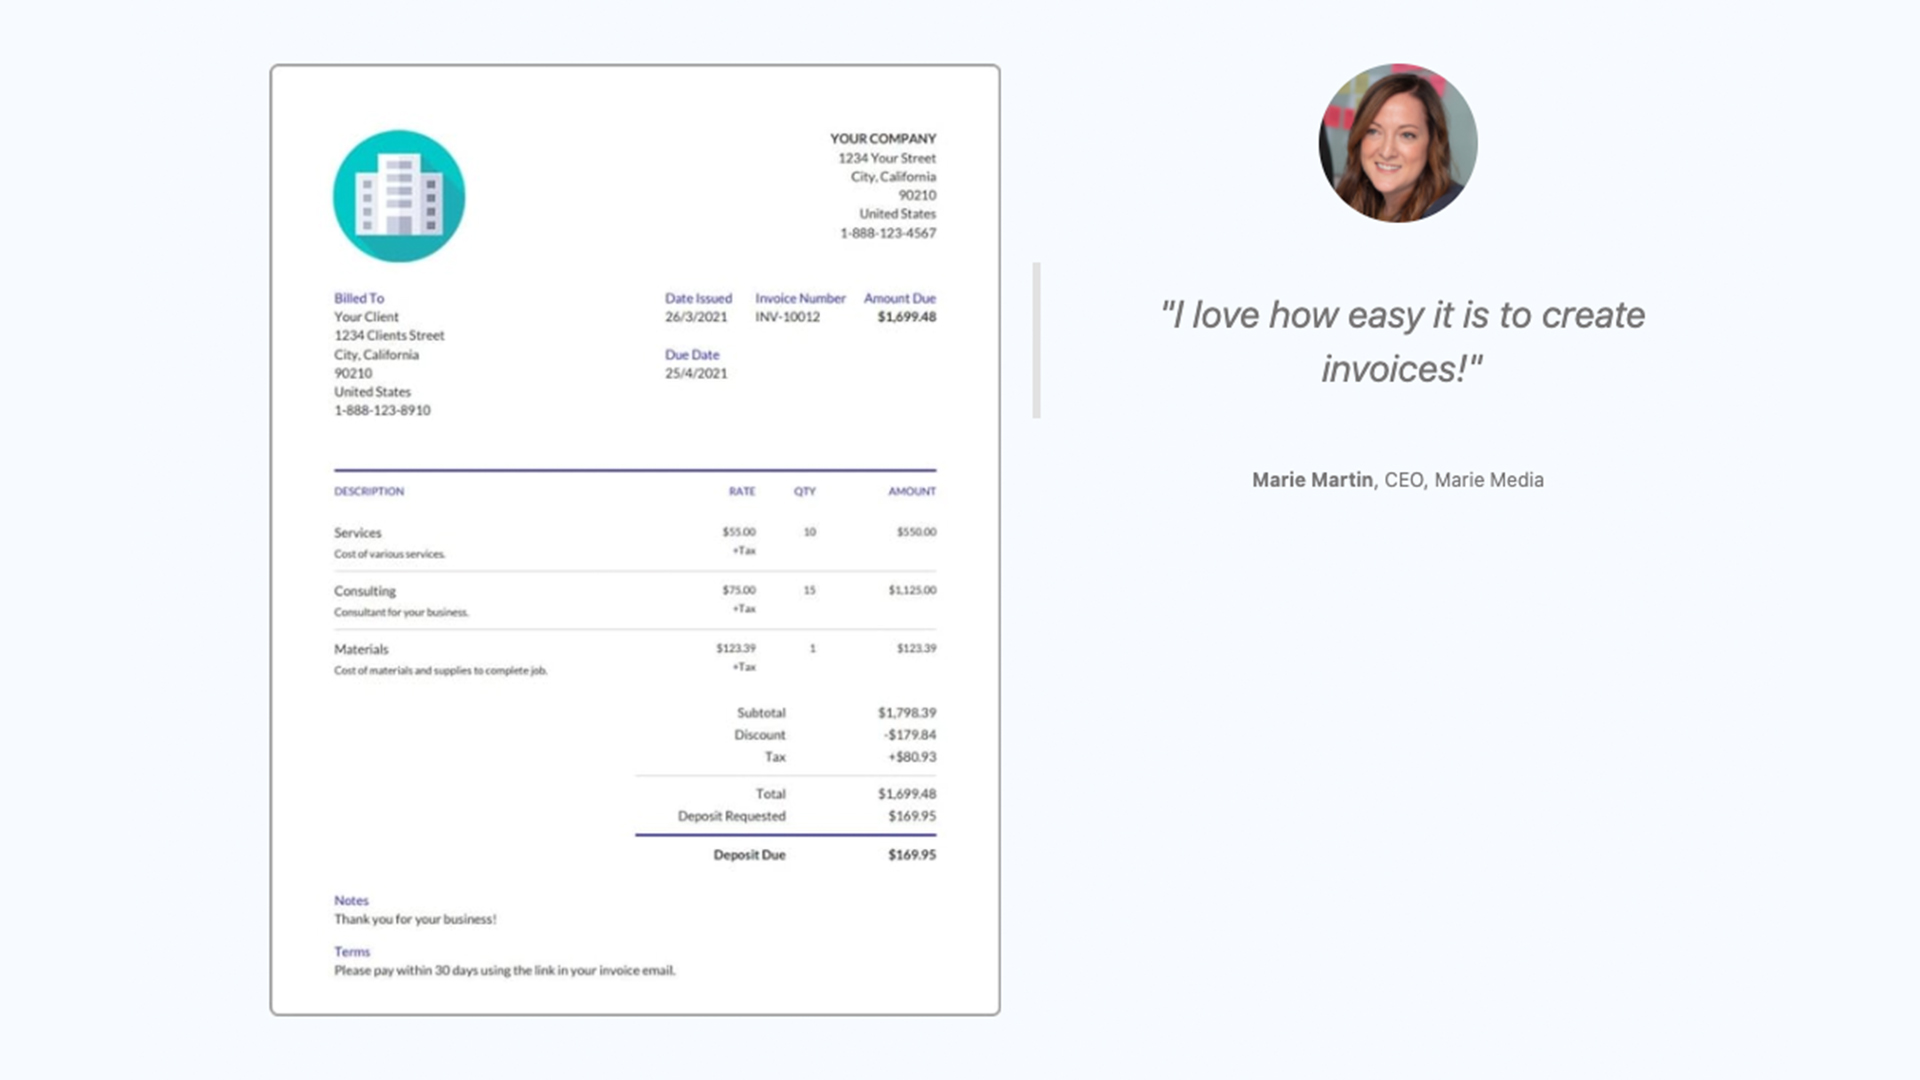 Subscribers rave about Invoicer's easy-to-use invoice generator.